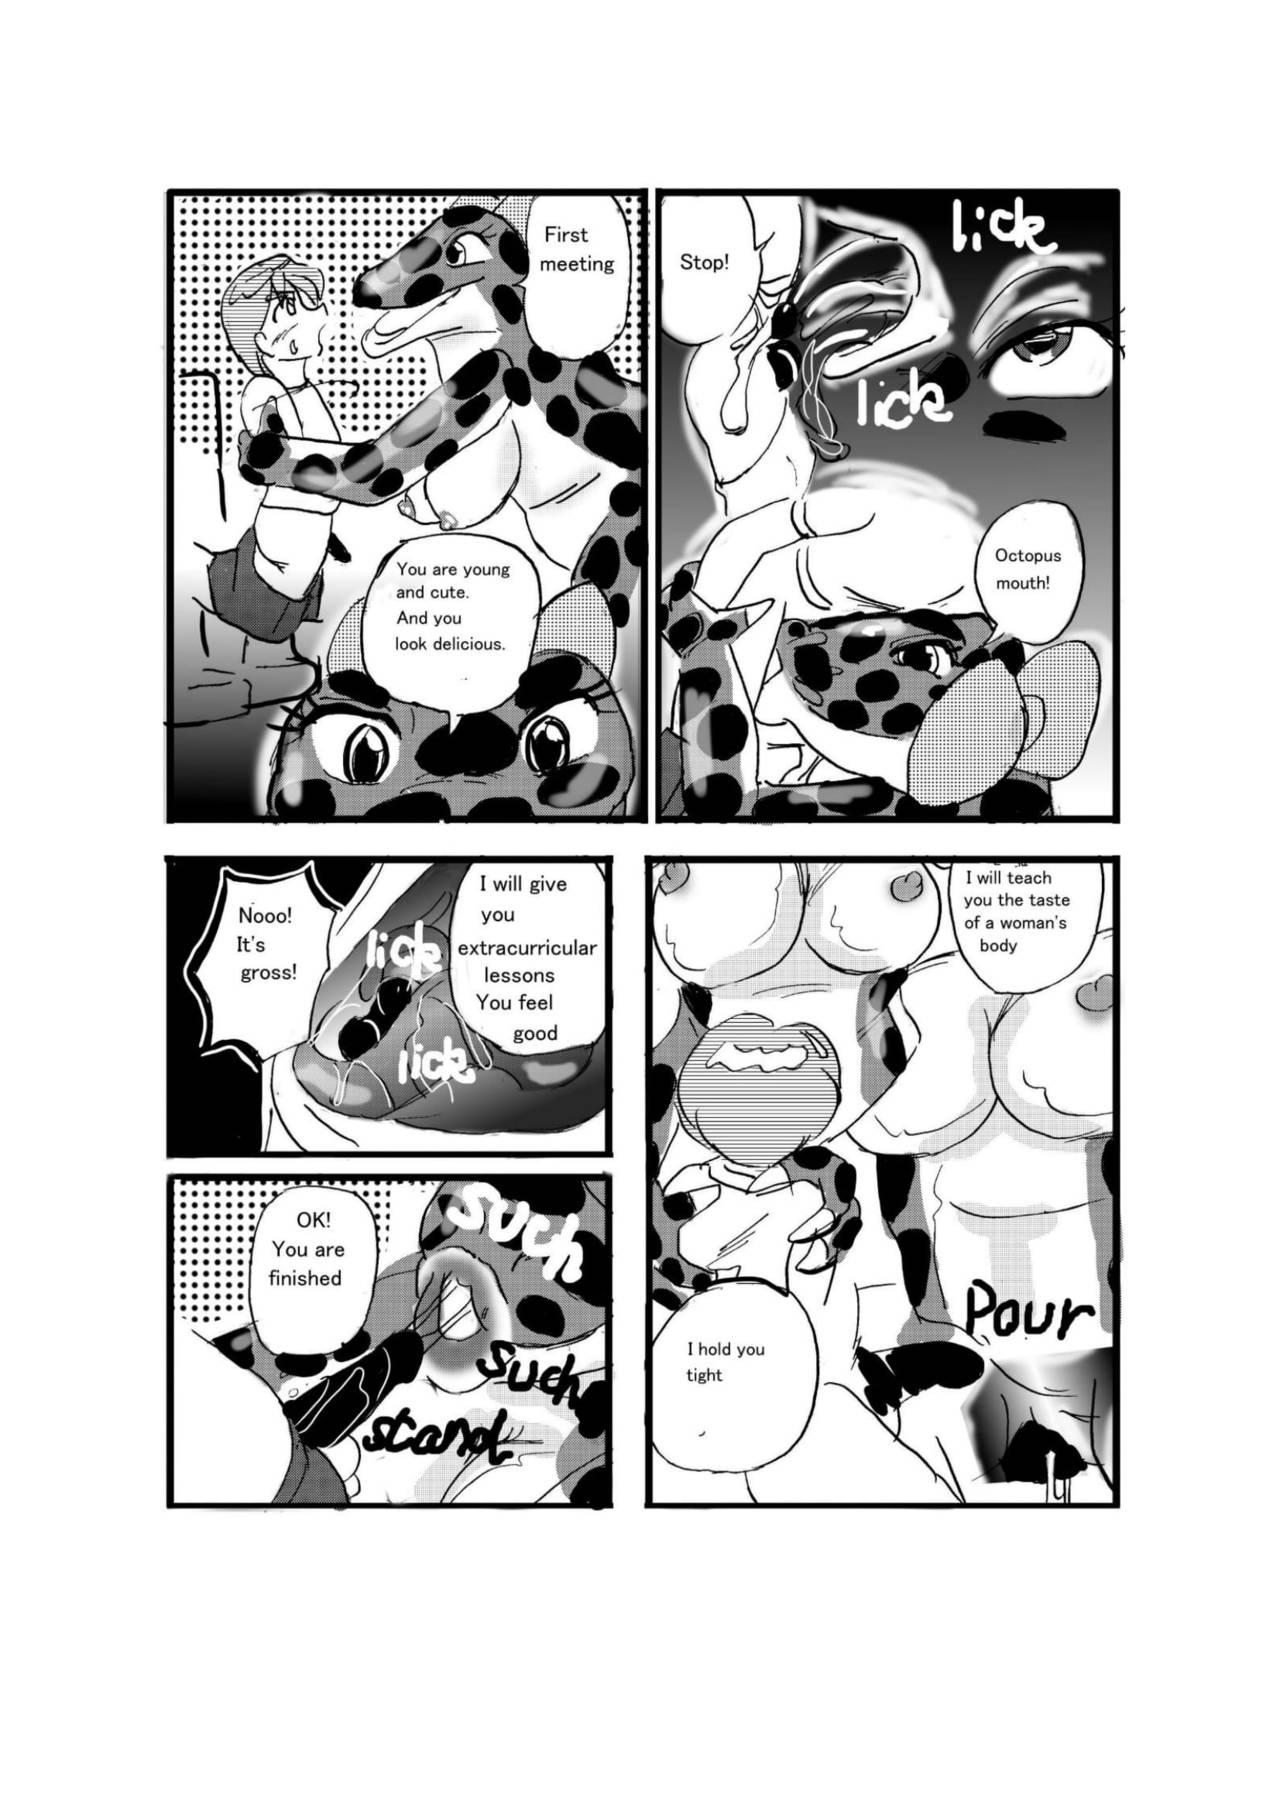 Ass Fetish Swallowed Whole vol.2 Waniko + What's Digestion? - Original Lips - Page 4